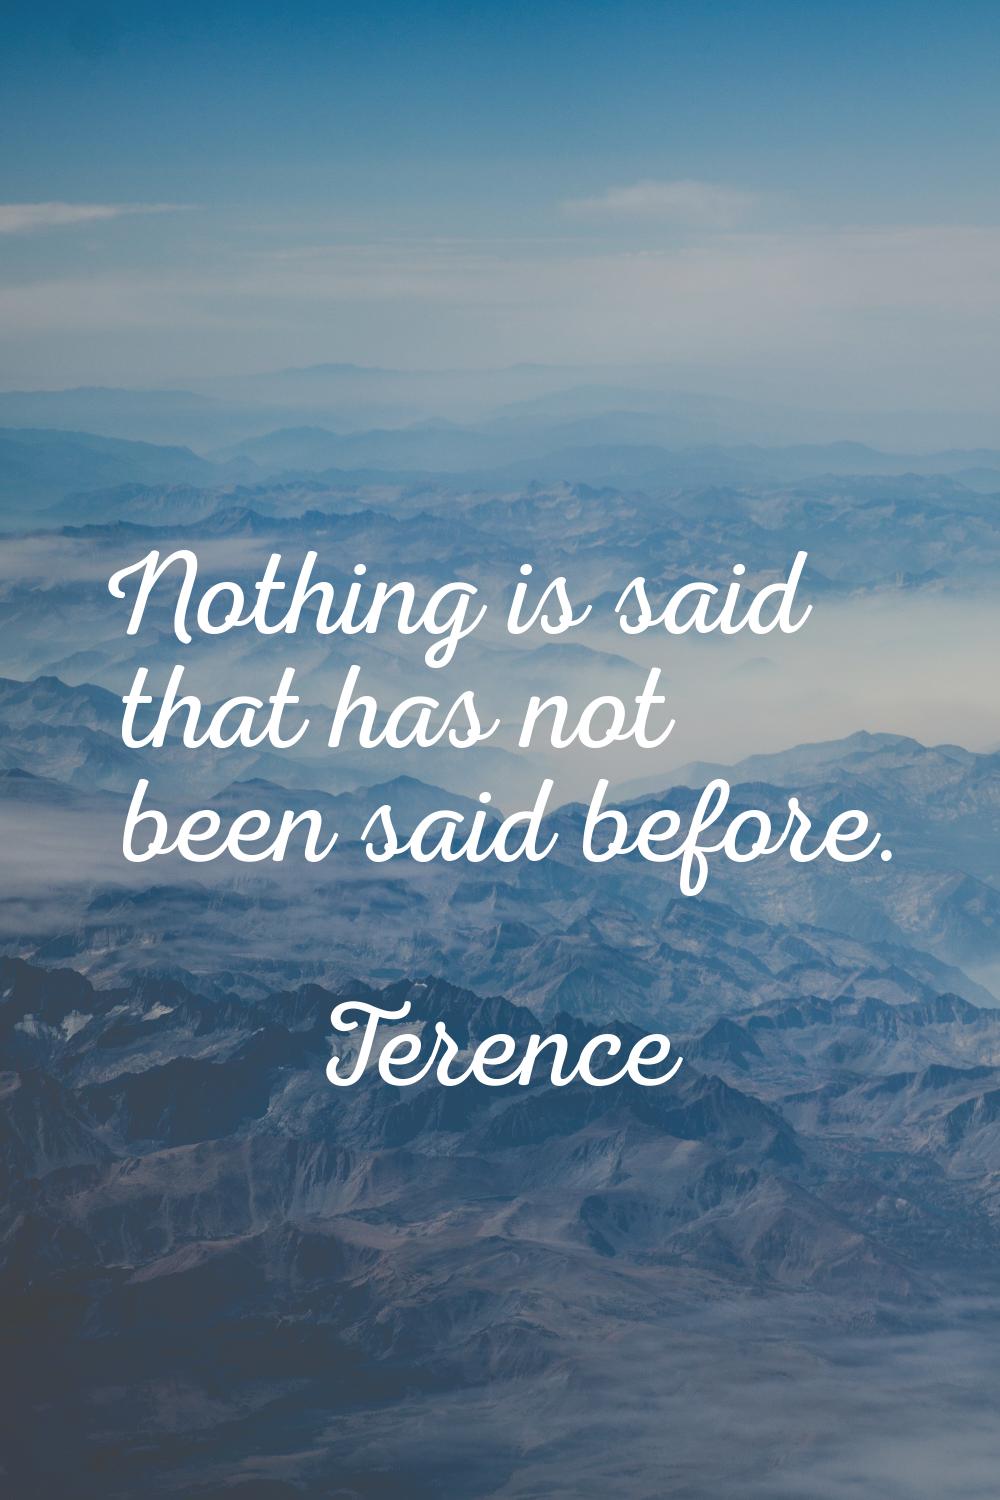 Nothing is said that has not been said before.